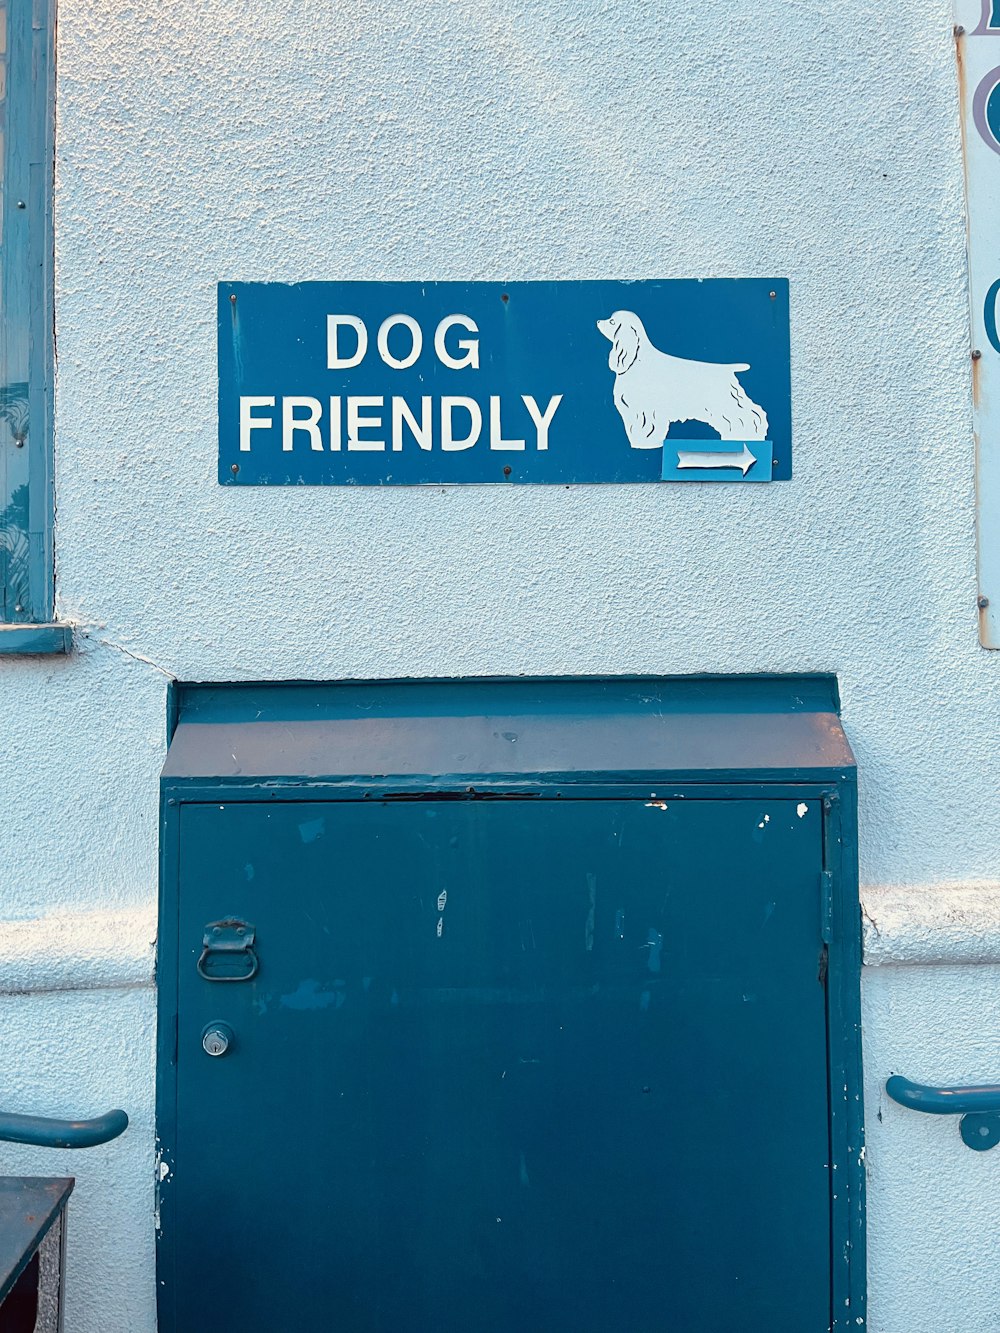 a dog friendly sign on the side of a building